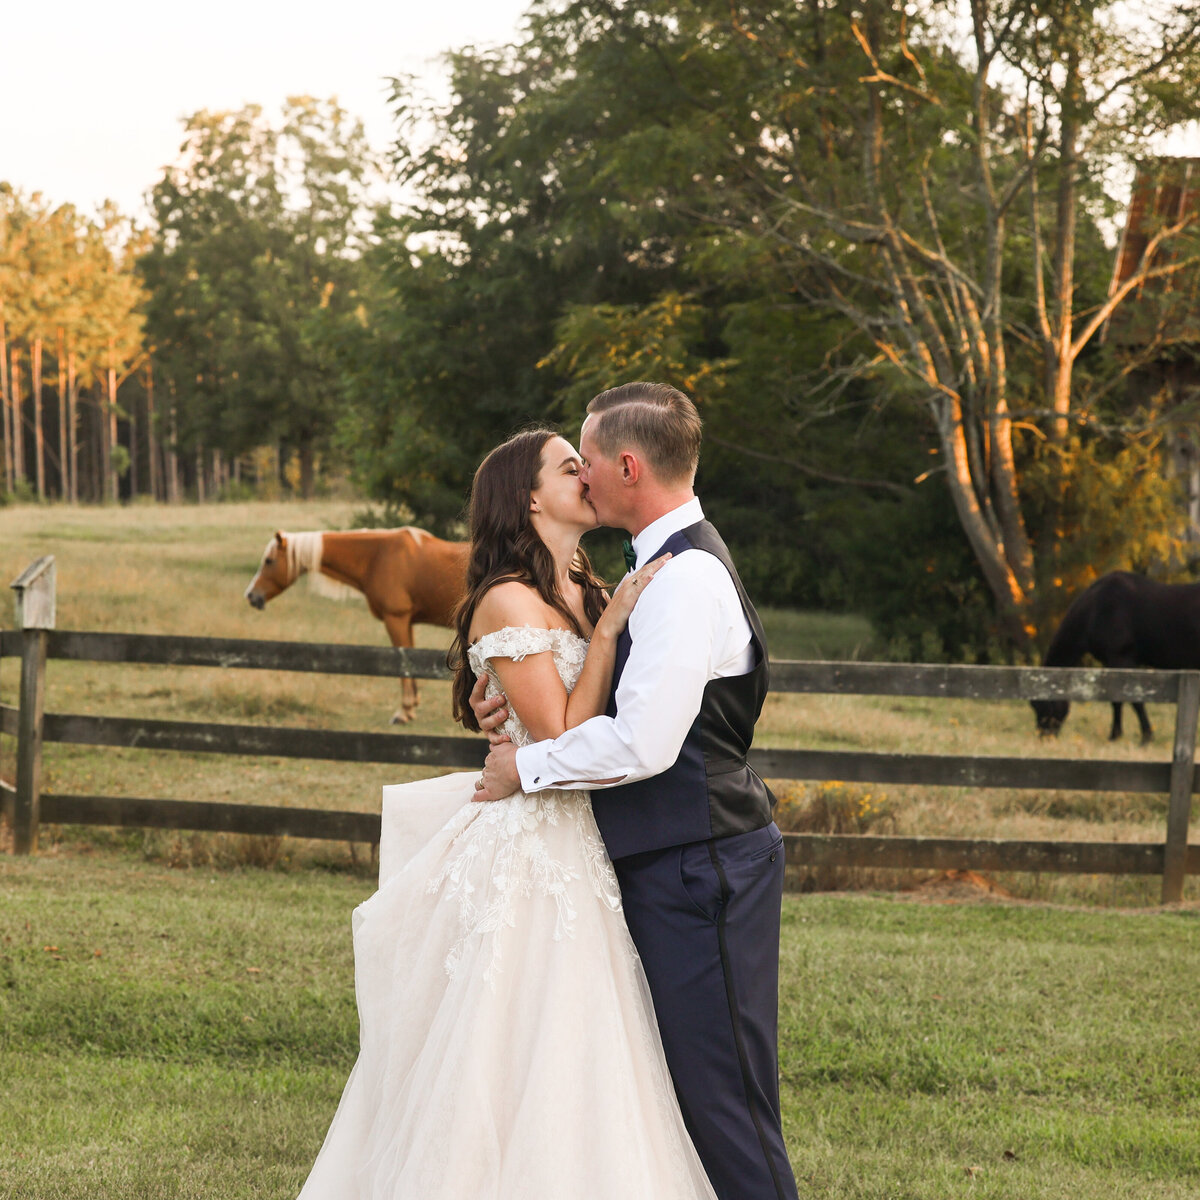 bride wearing white tulle dress and groom wearing blue suit and white shirt kissing with horses in the background